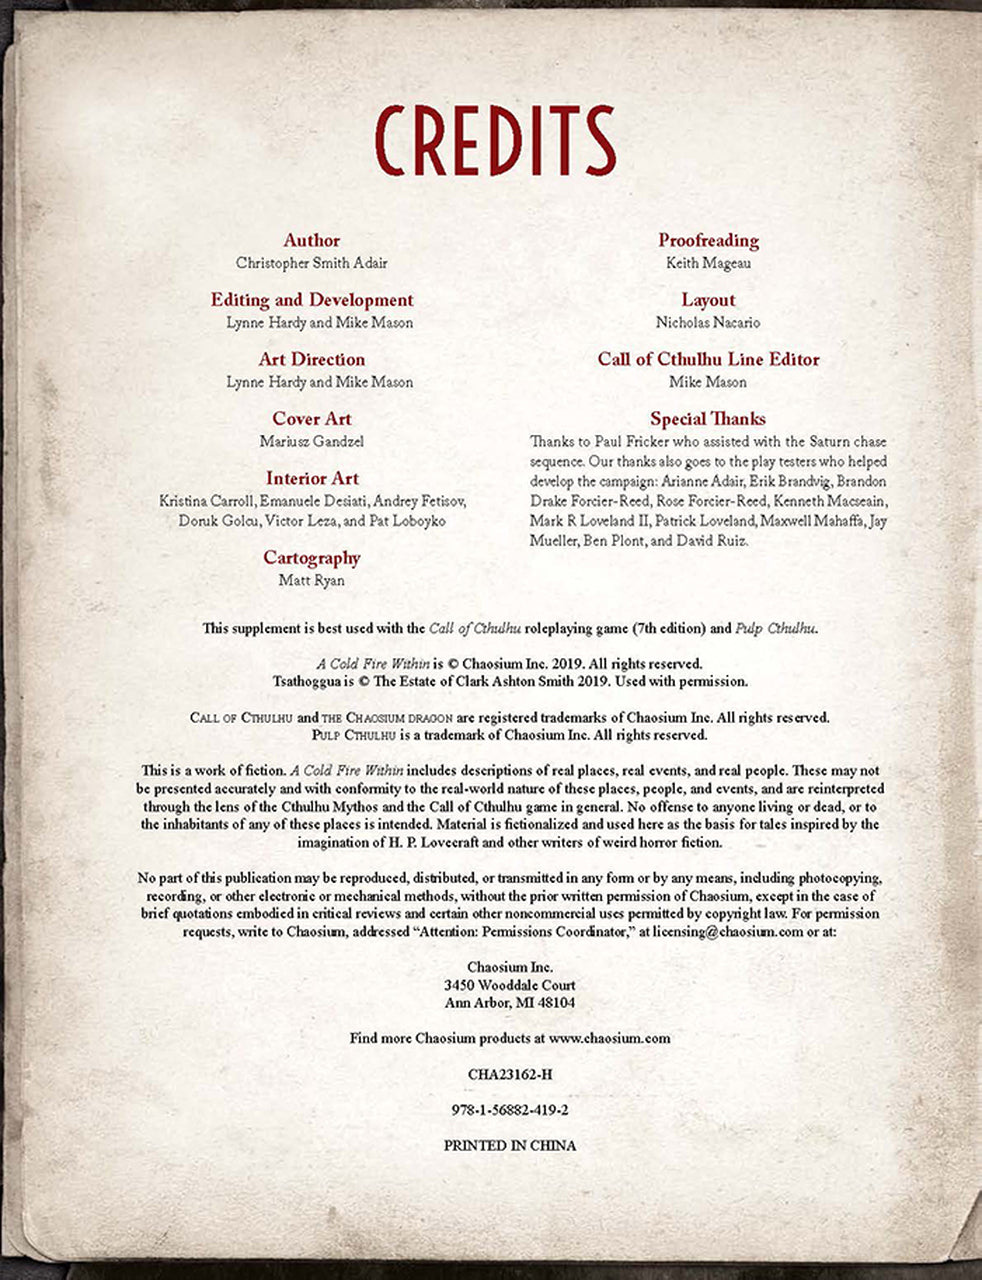 Call of Cthulhu RPG: A Cold Fire Within credits